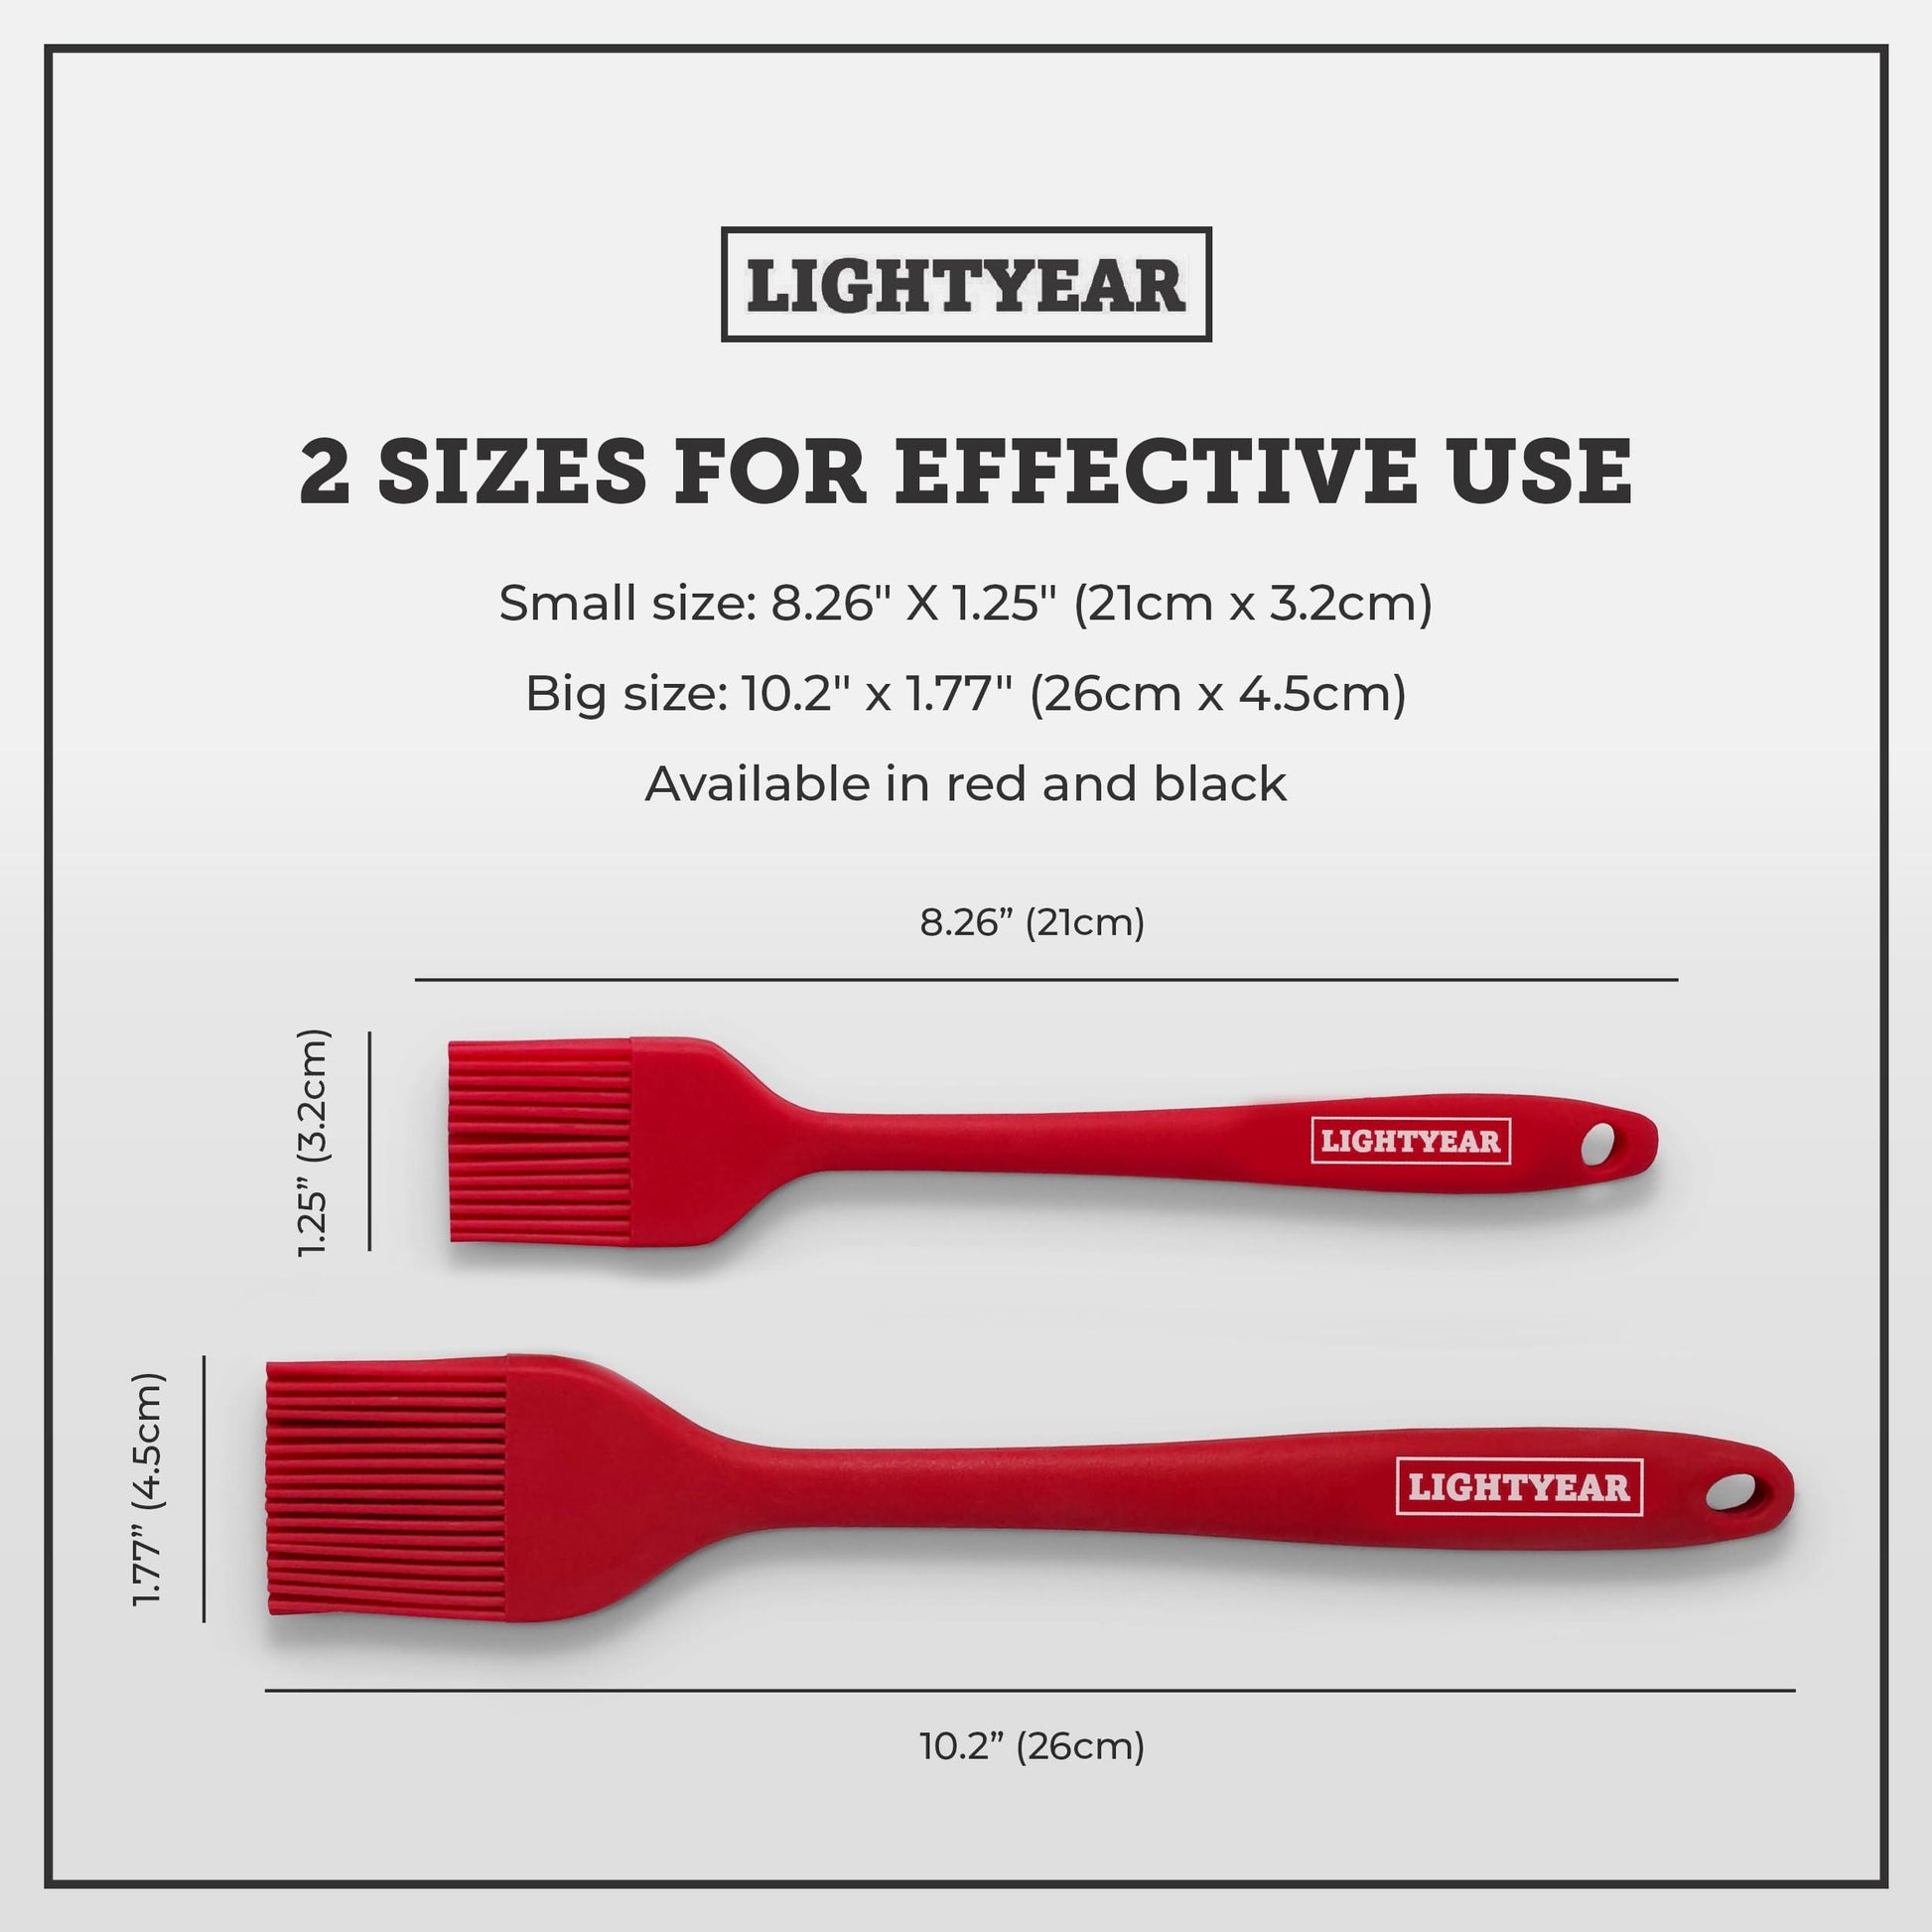 Lightyear Silicone Basting Pastry Brush Set (2 Pcs) ❘ 450°F Heat Resistant Oil Brush for Your Kitchen - Ideal For BBQ’s, Baking & Cooking | 100% Food Grade Silicone - BPA Free & Dishwasher Safe (Red) - CookCave